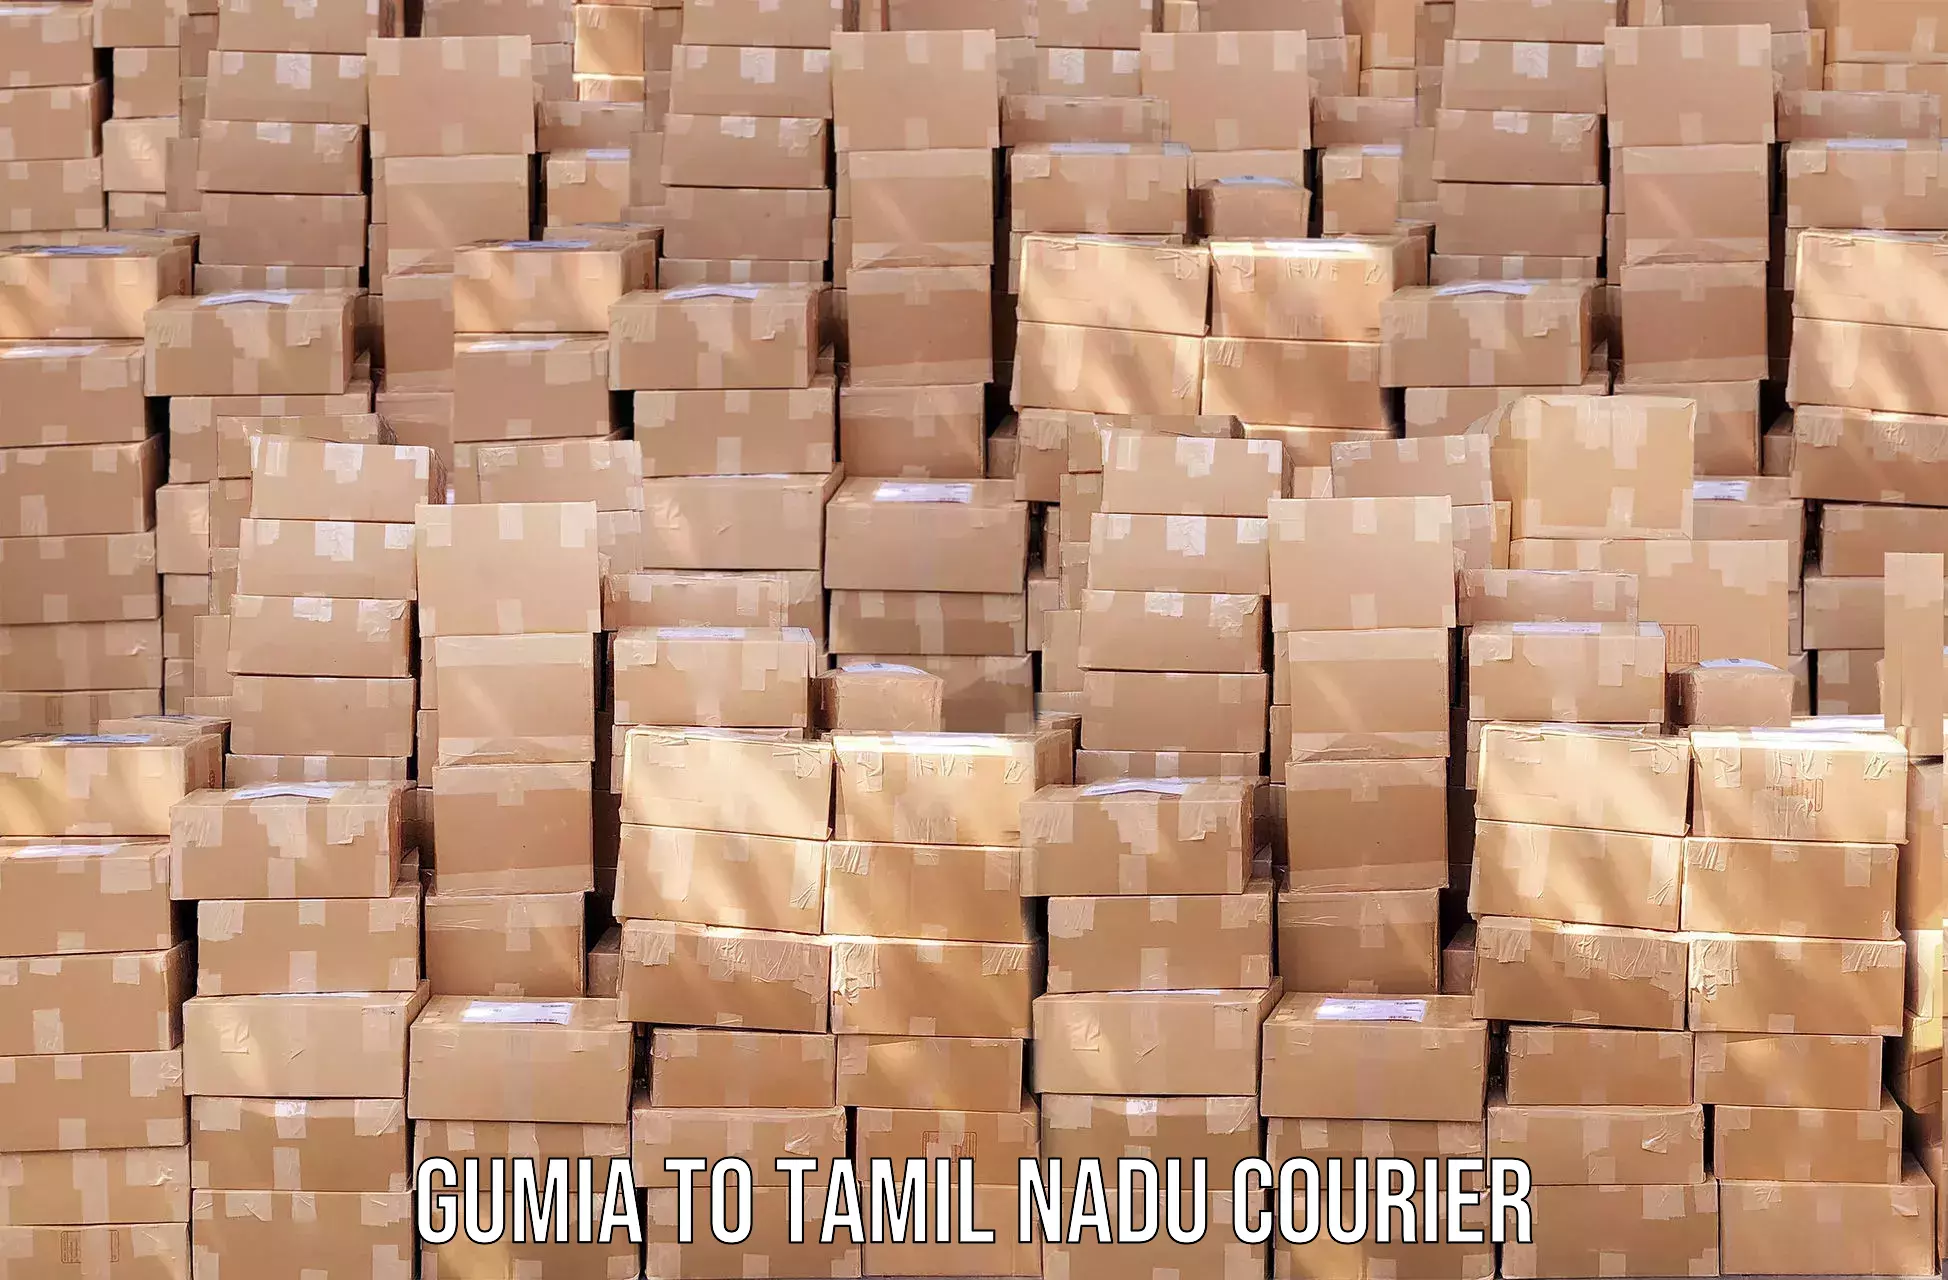 Local courier options Gumia to Sattur